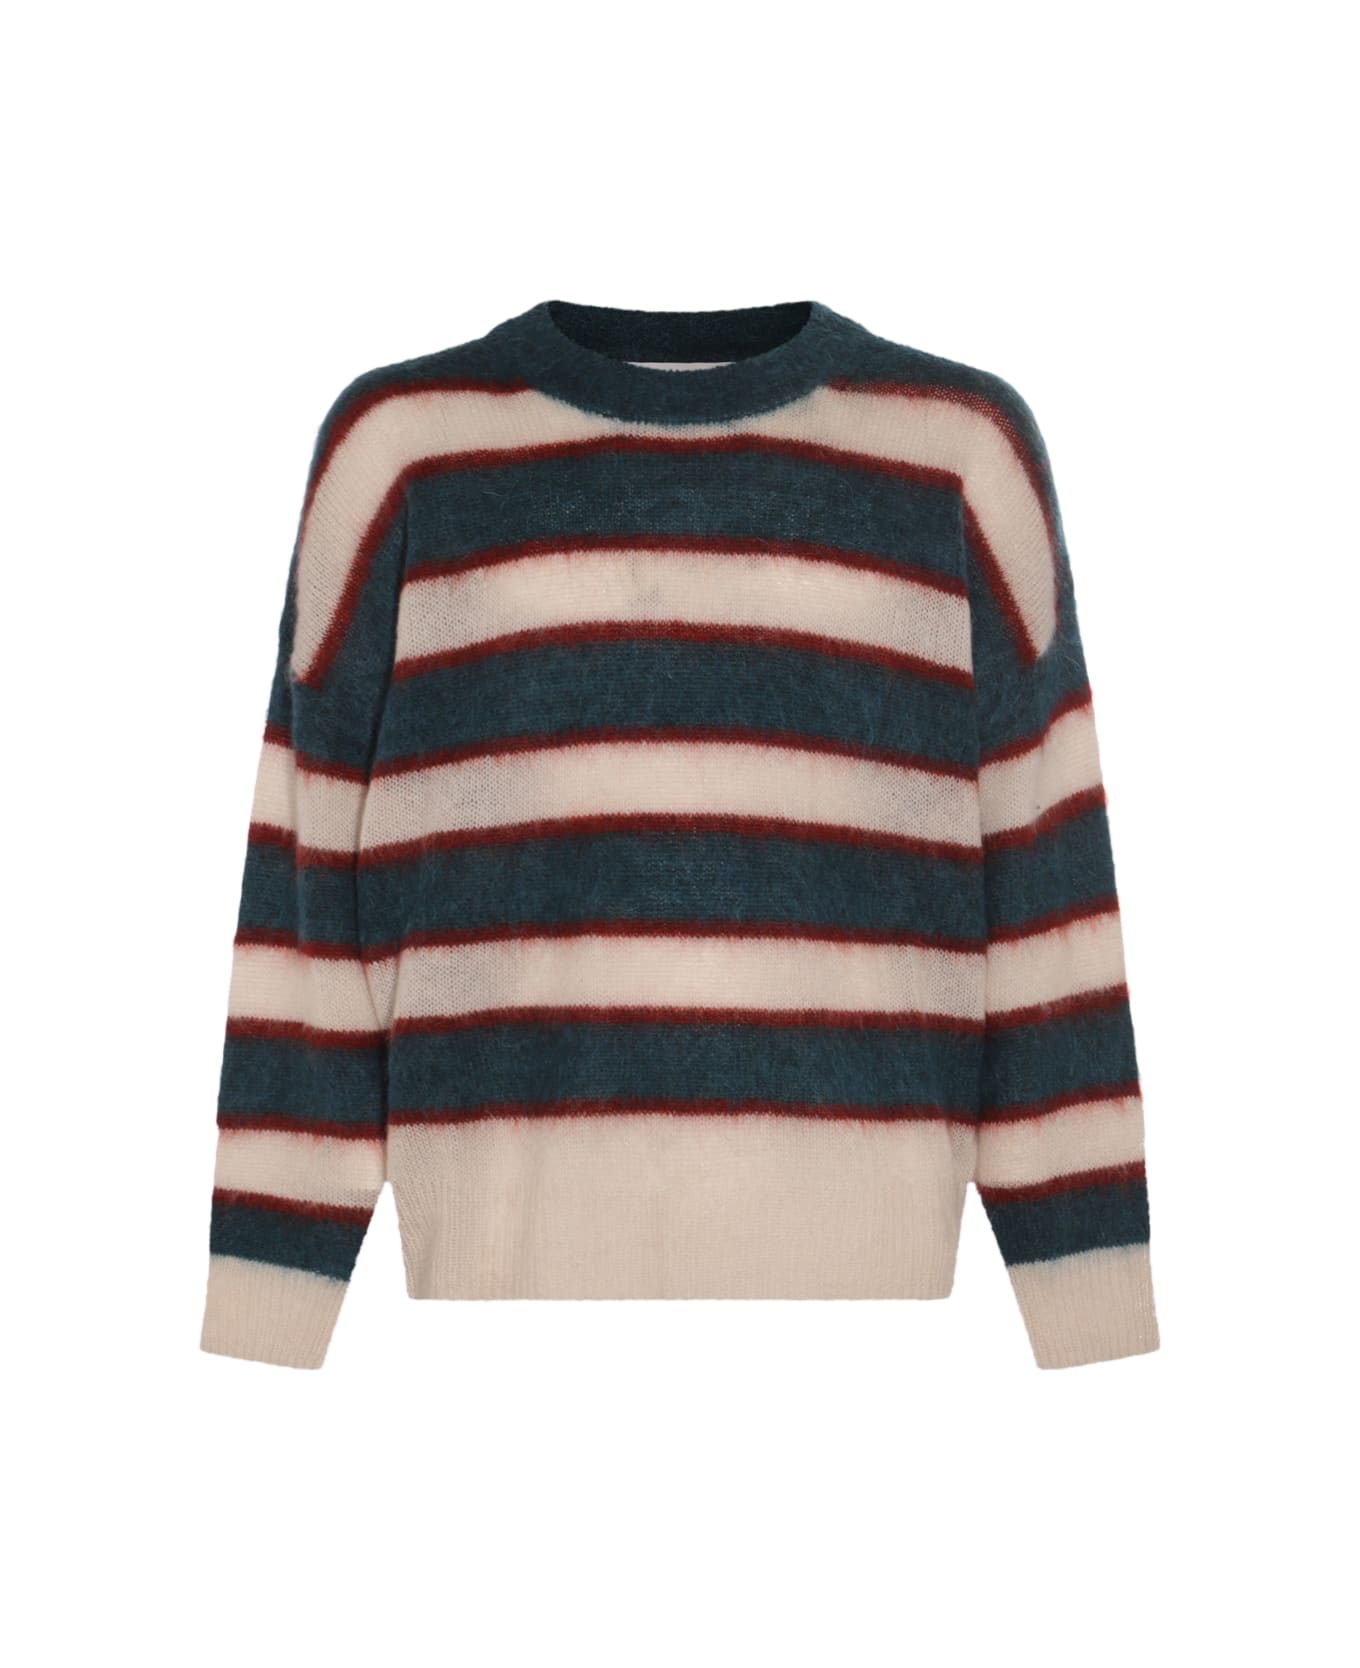 Isabel Marant Green And White Knitwear - Red